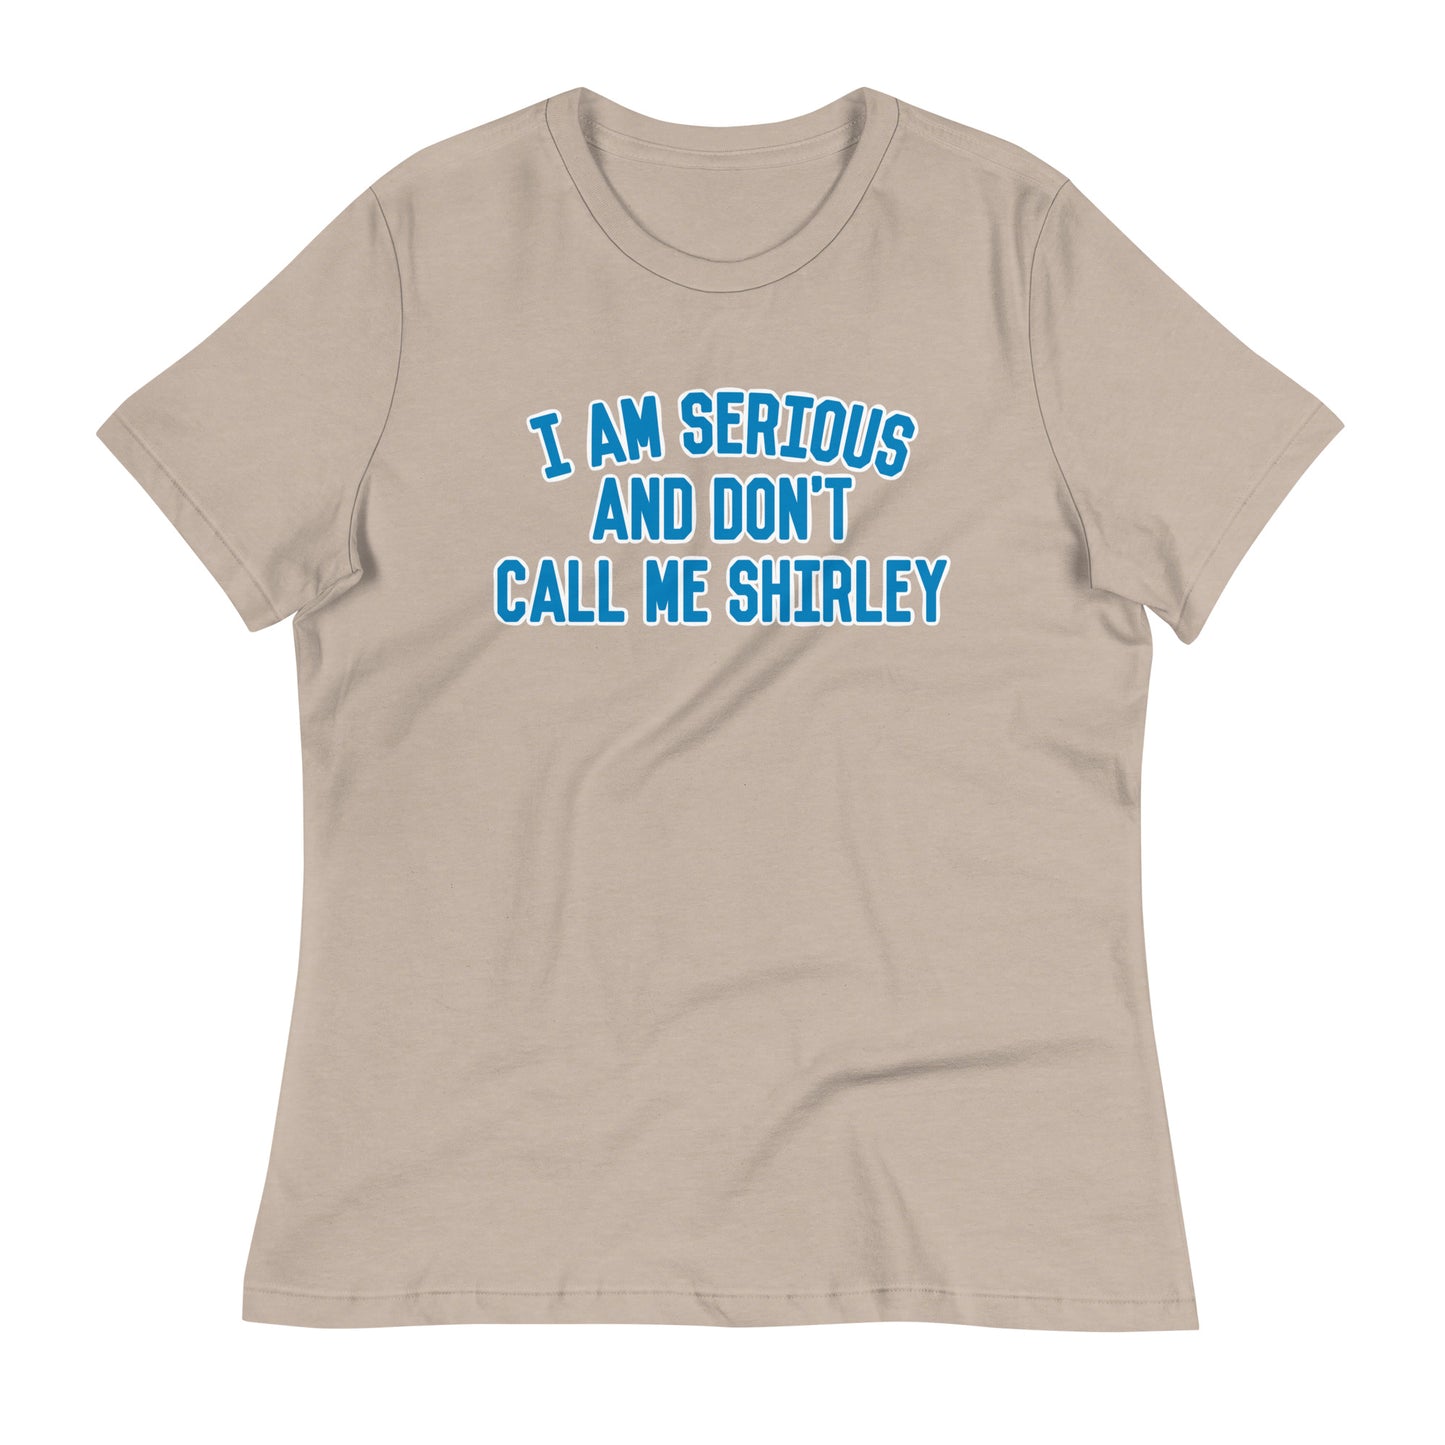 I Am Serious, And Don't Call Me Shirley Women's Signature Tee